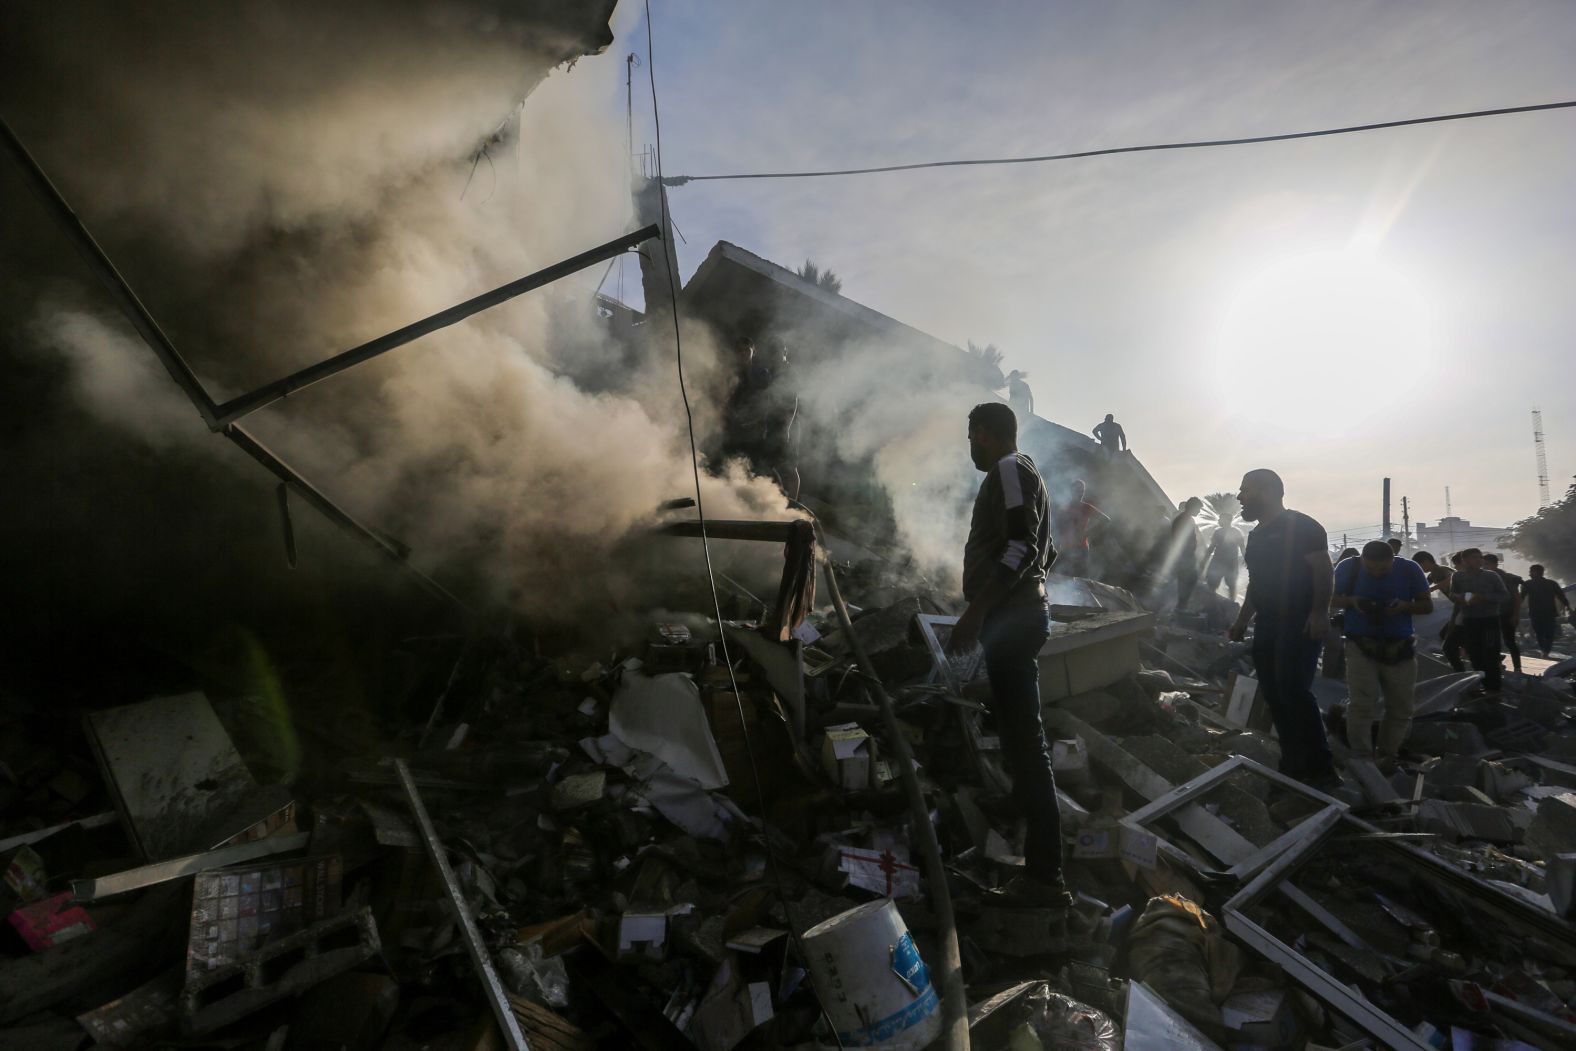 People search through destroyed buildings during Israeli air raids in Khan Younis, Gaza on November 7.